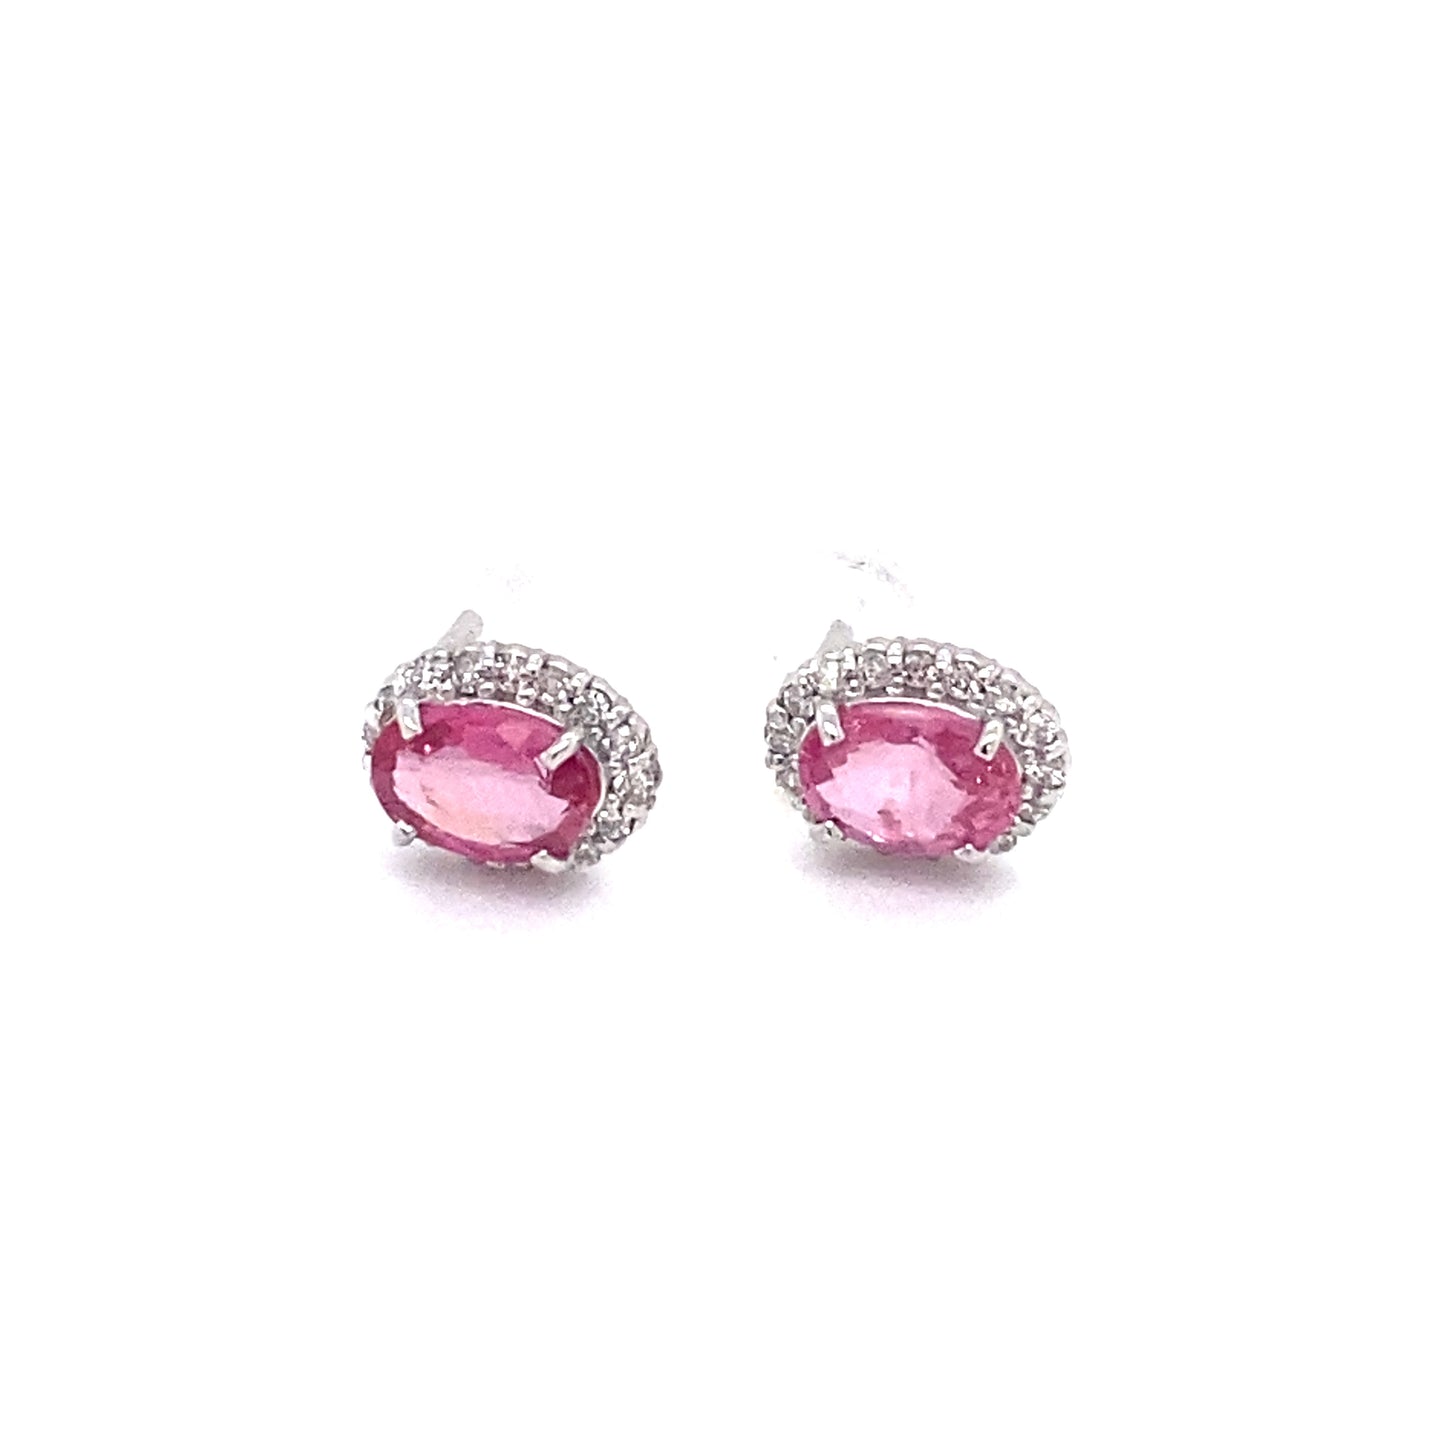 1.0ctw Oval Pink Sapphire Halo Stud Earrings in 18K White Gold